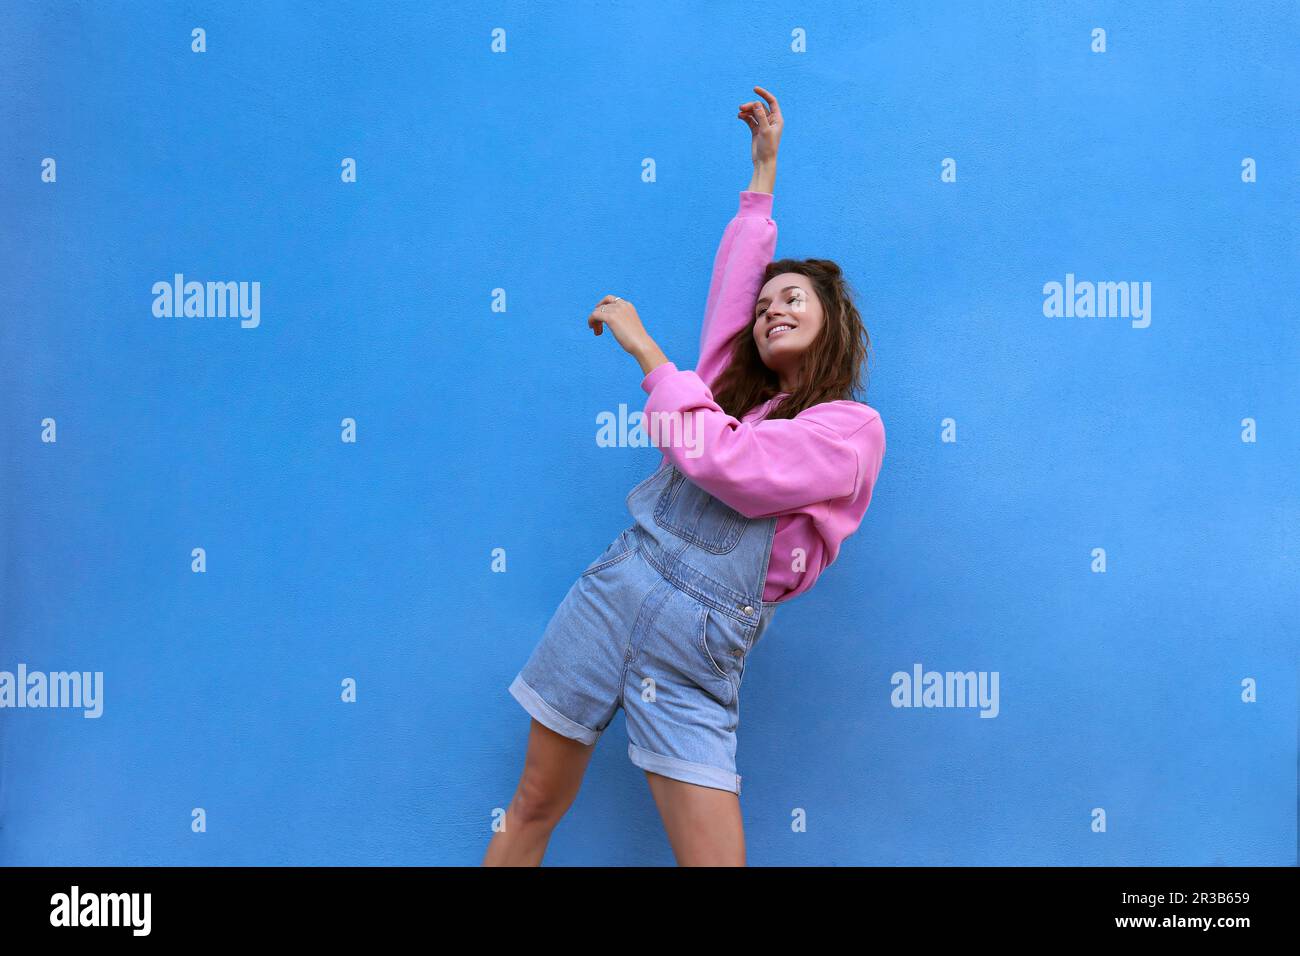 Carefree woman dancing against blue background Stock Photo